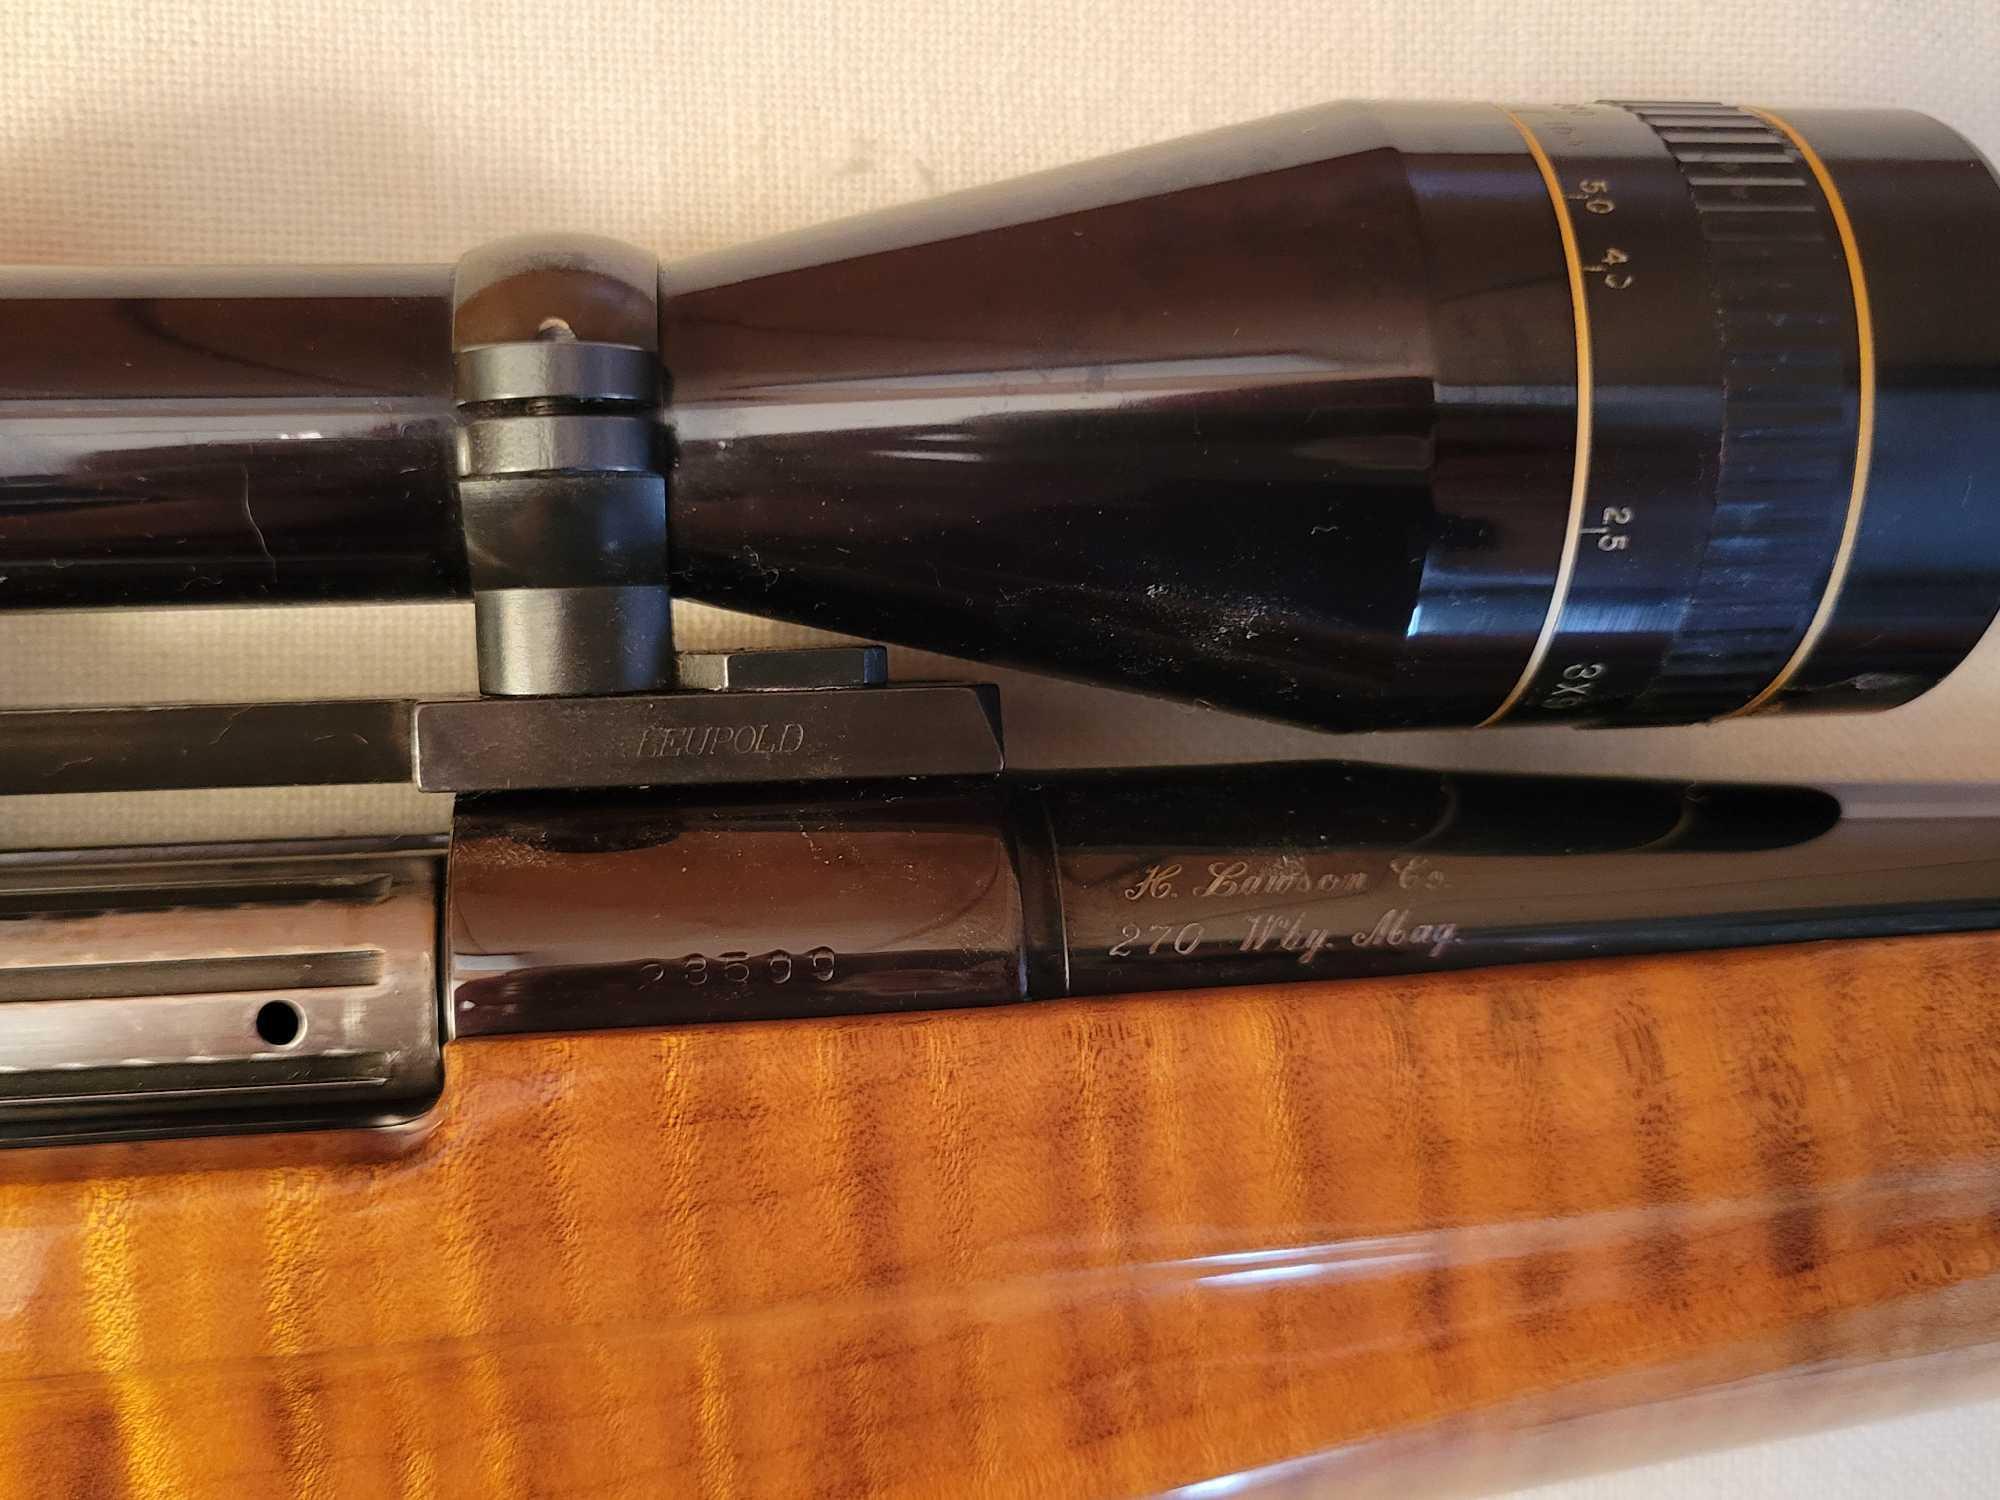 Weatherby mark 270 wby. mag. bolt action rifle with 3-9 leupold scope and hard case